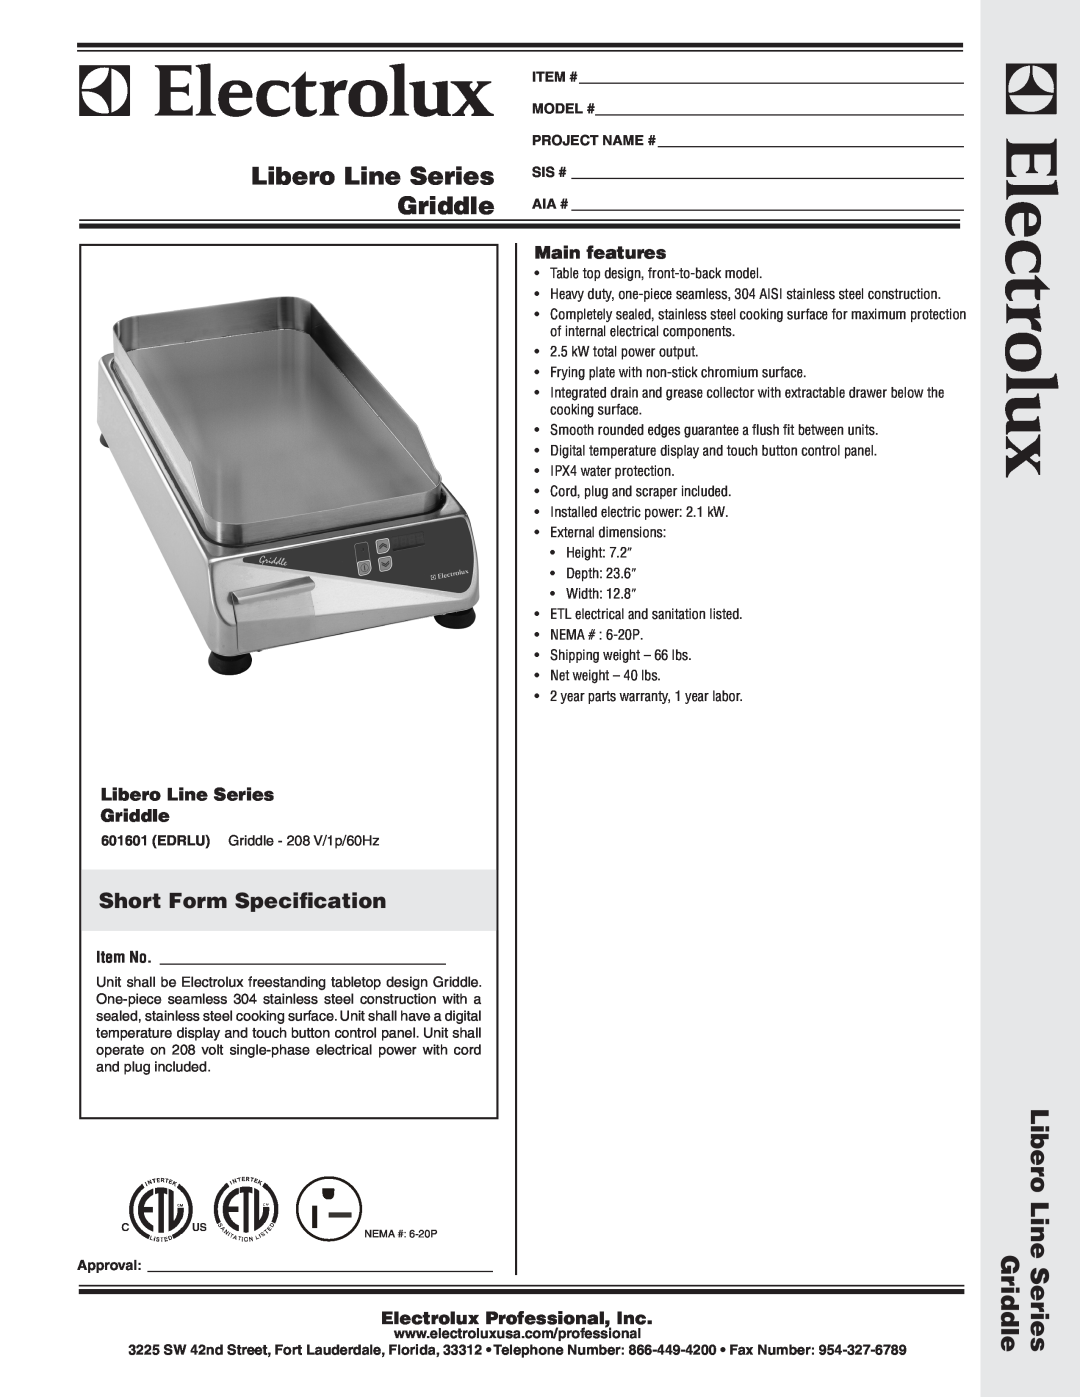 Electrolux EDRLU, 601601 dimensions Short Form Specification, Main features, Libero Line Series Griddle, Item No, Approval 